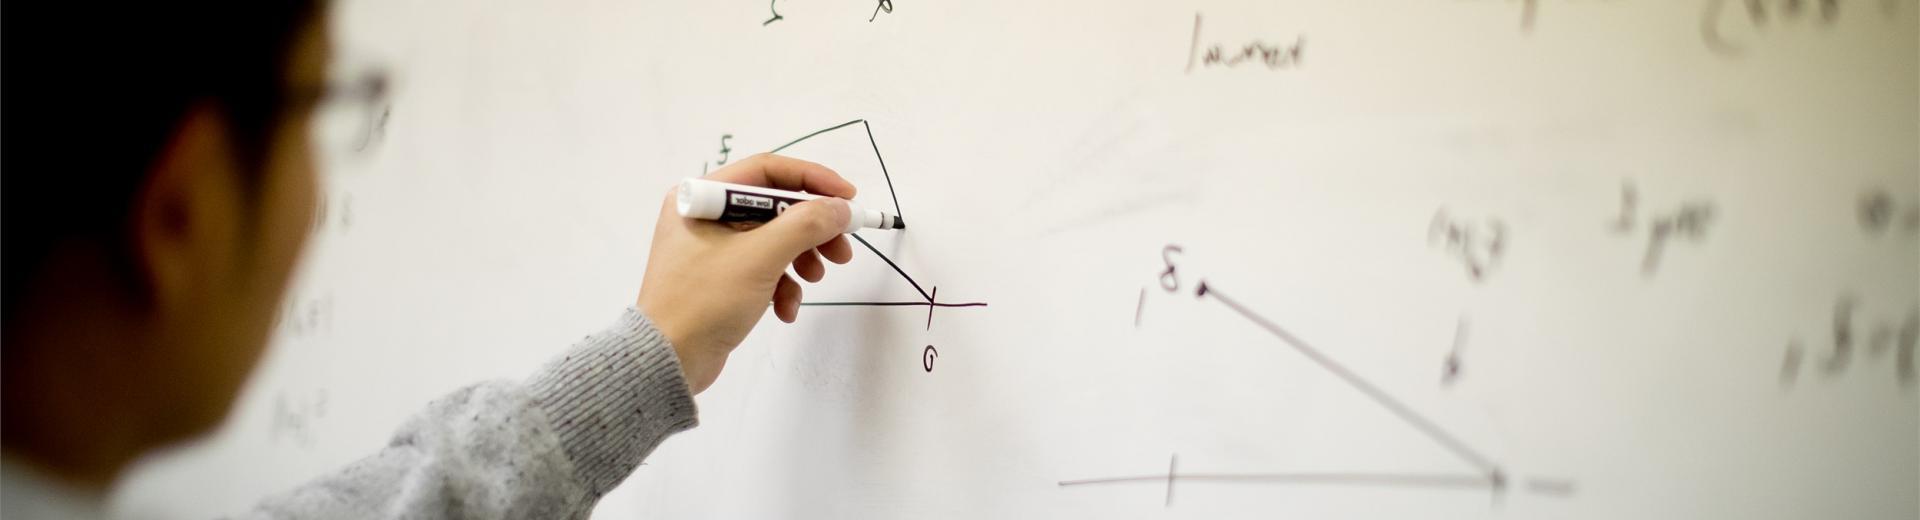 Temple student working out a math equation on a white board.